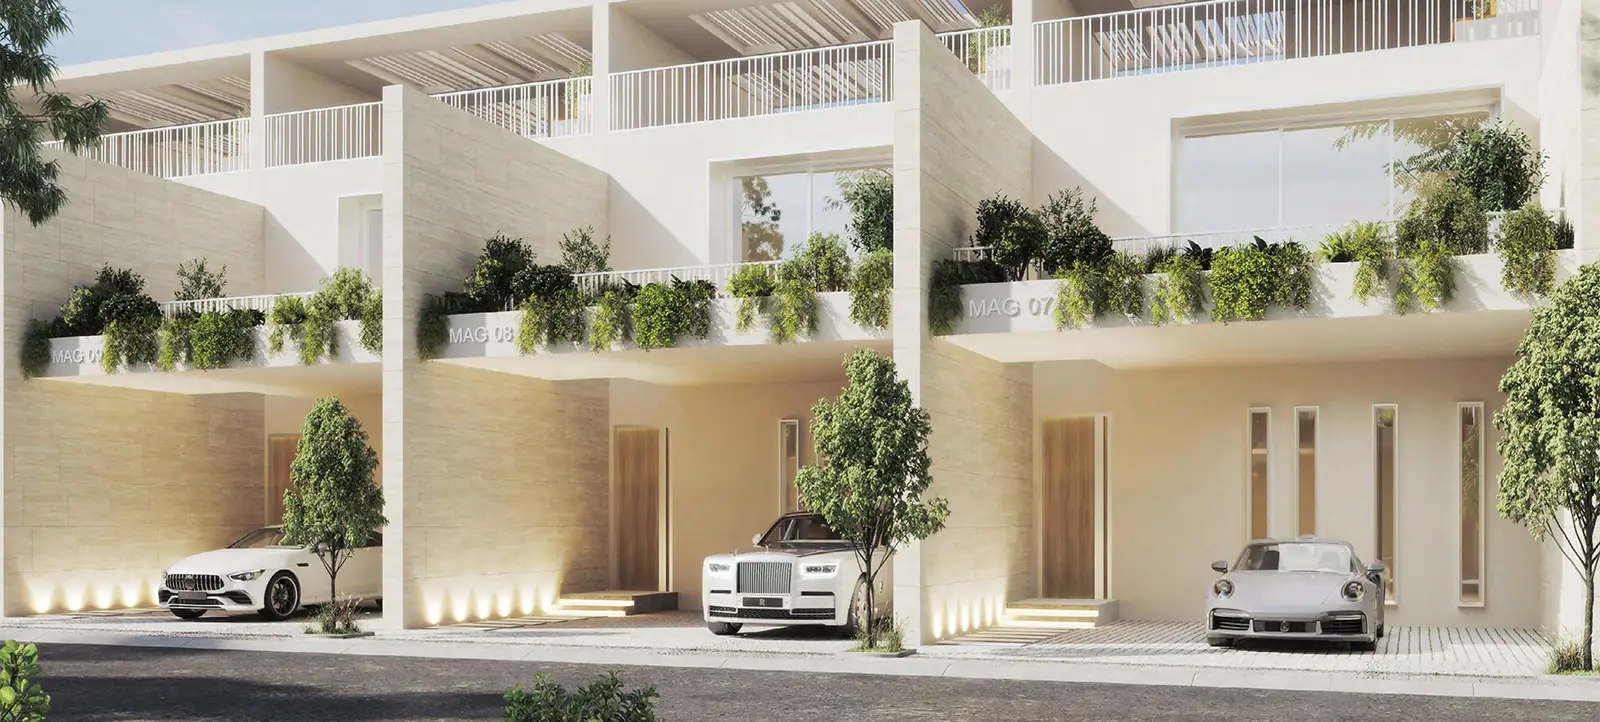 Luxury Townhouses at MAG 22